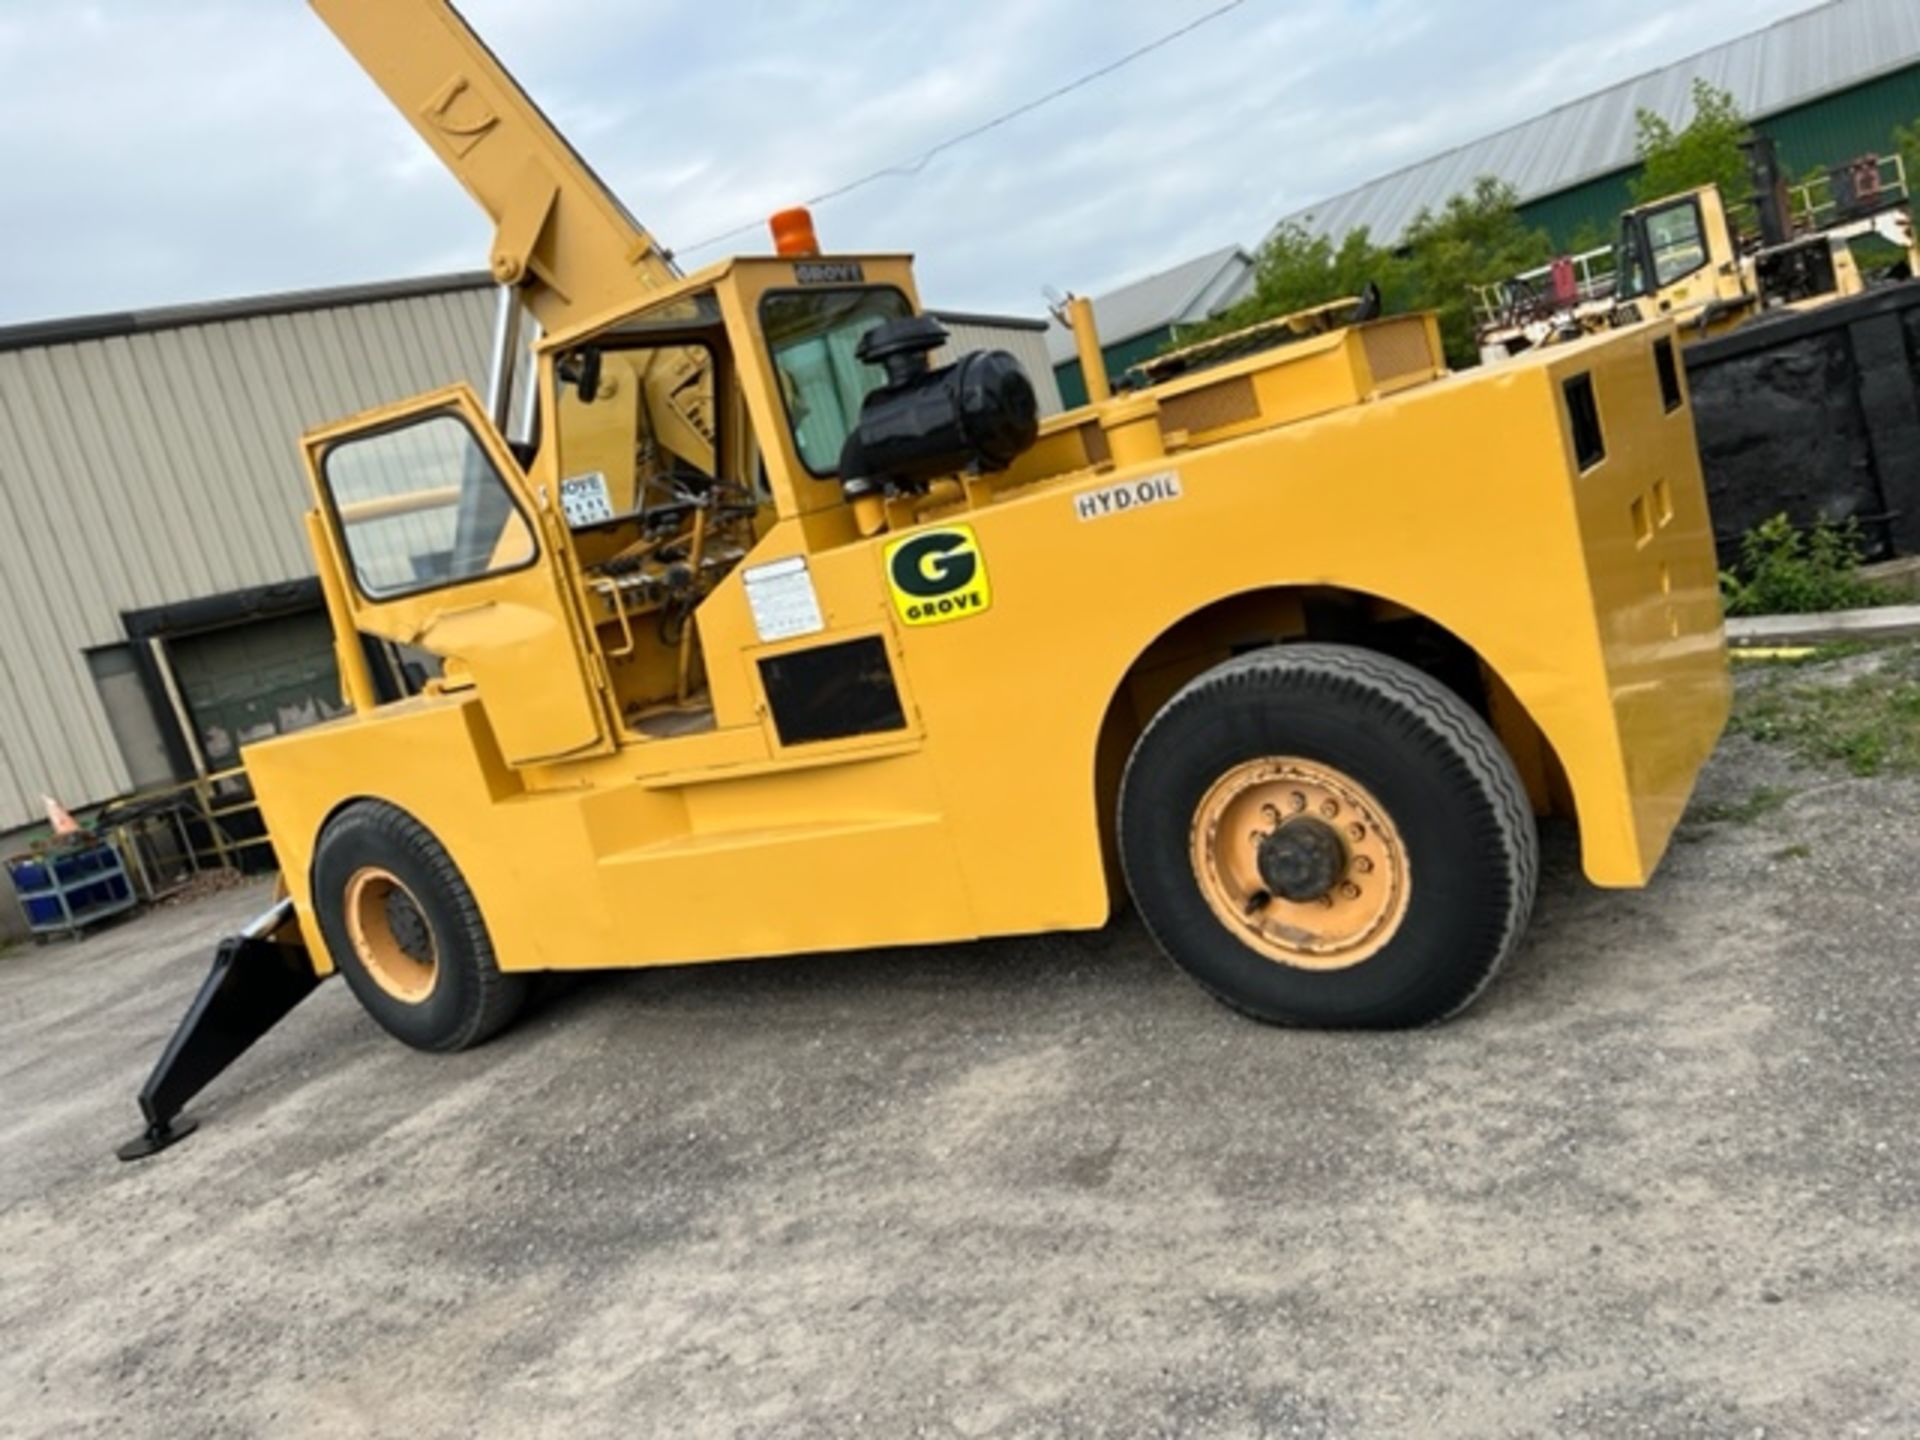 FREE CUSTOMS - Grove Crane Unit 35,000lbs Capacity with 51' REACH with LOW HOURS Detroit Diesel - Image 7 of 10